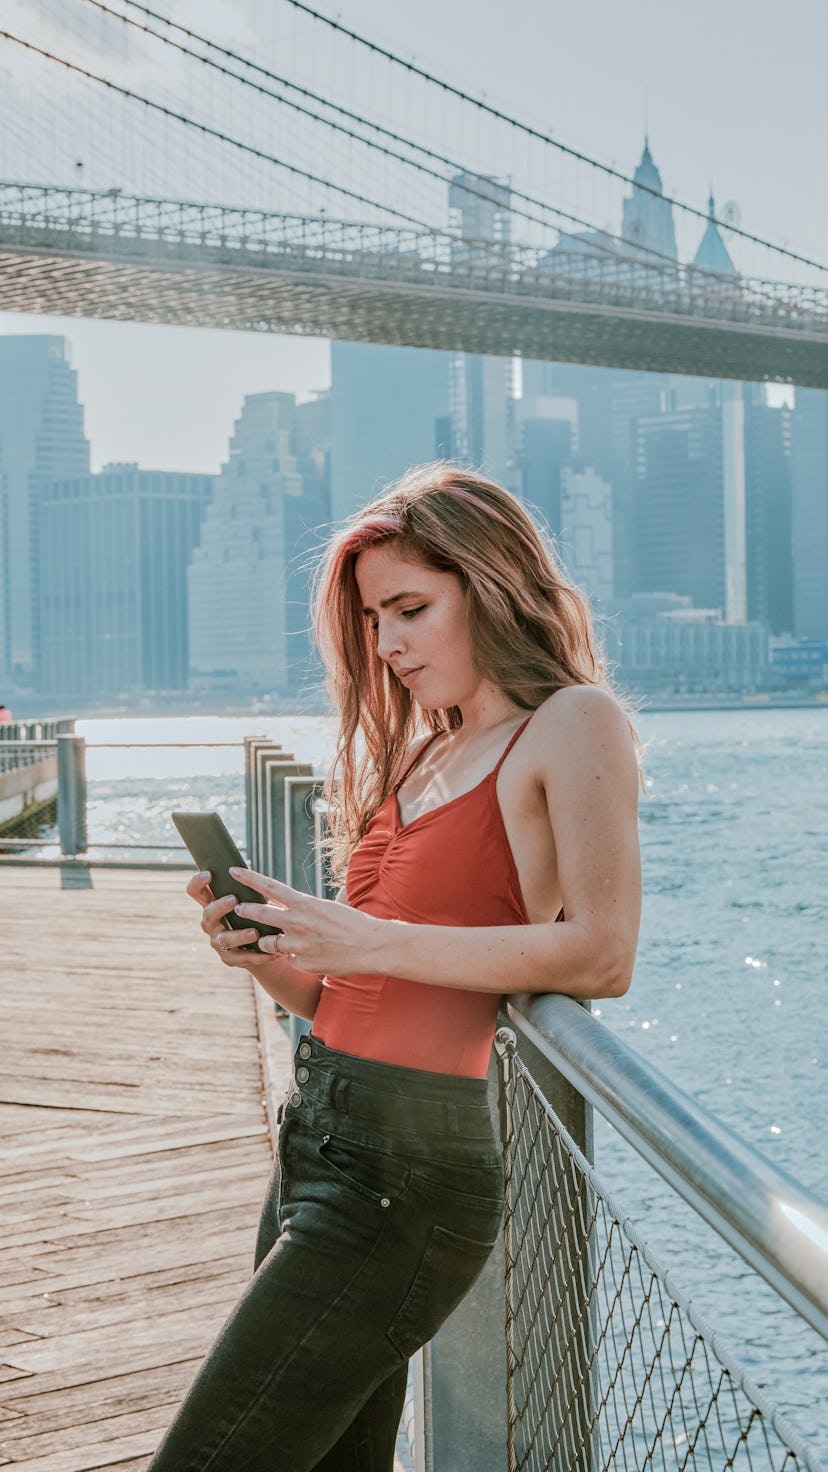 Young woman texting by a bridge on June 3, when Mercury retrograde spring 2022 ended.